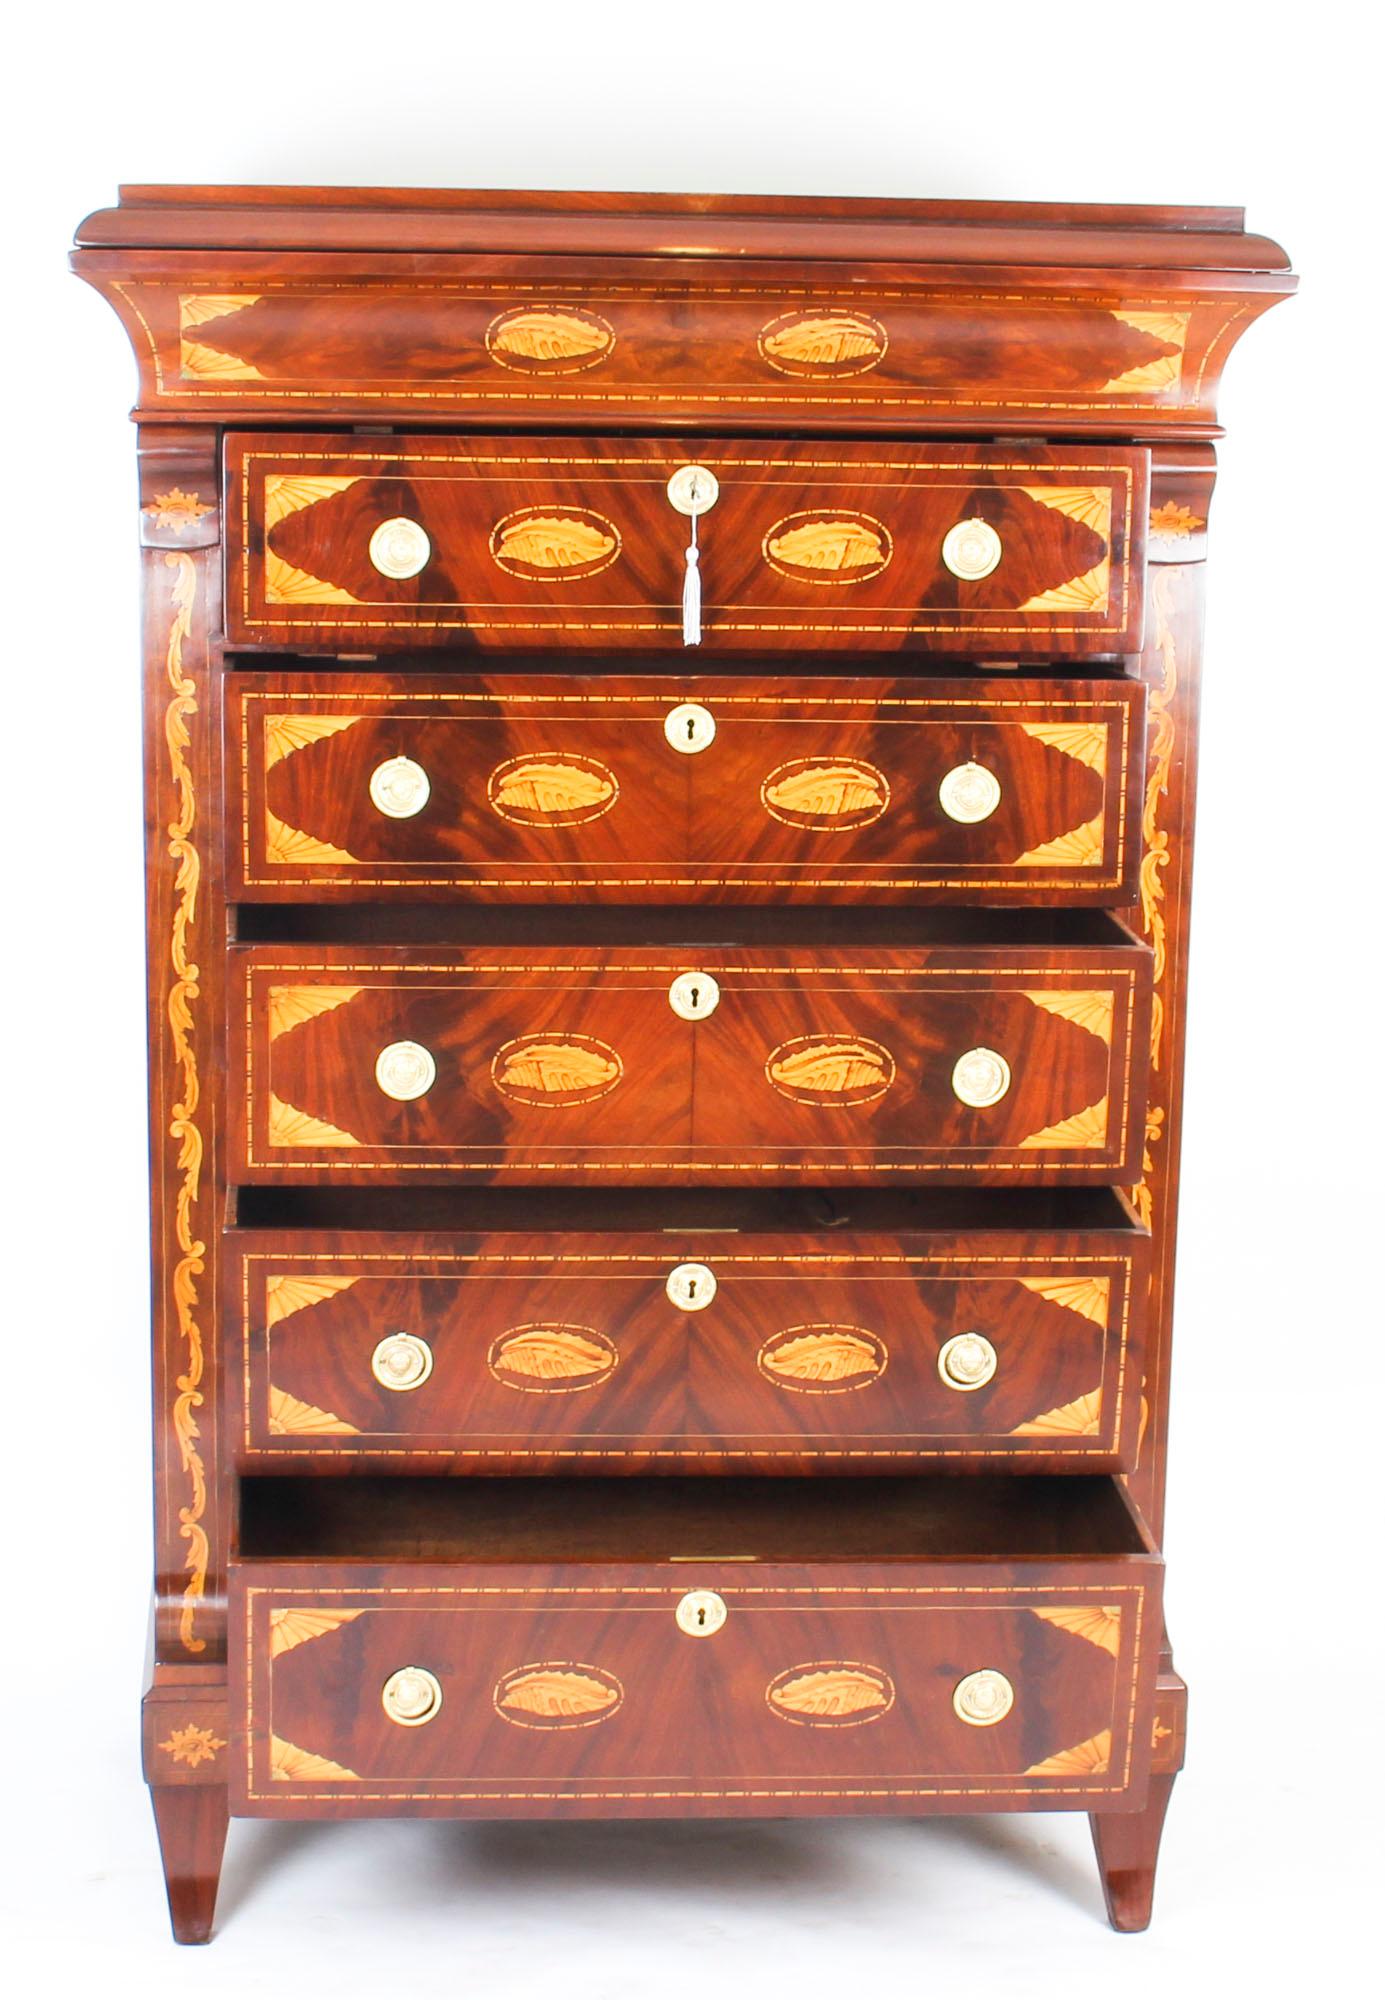 Antique Dutch Marquetry Walnut Seven Drawer Chest, Early 19th Century For Sale 2